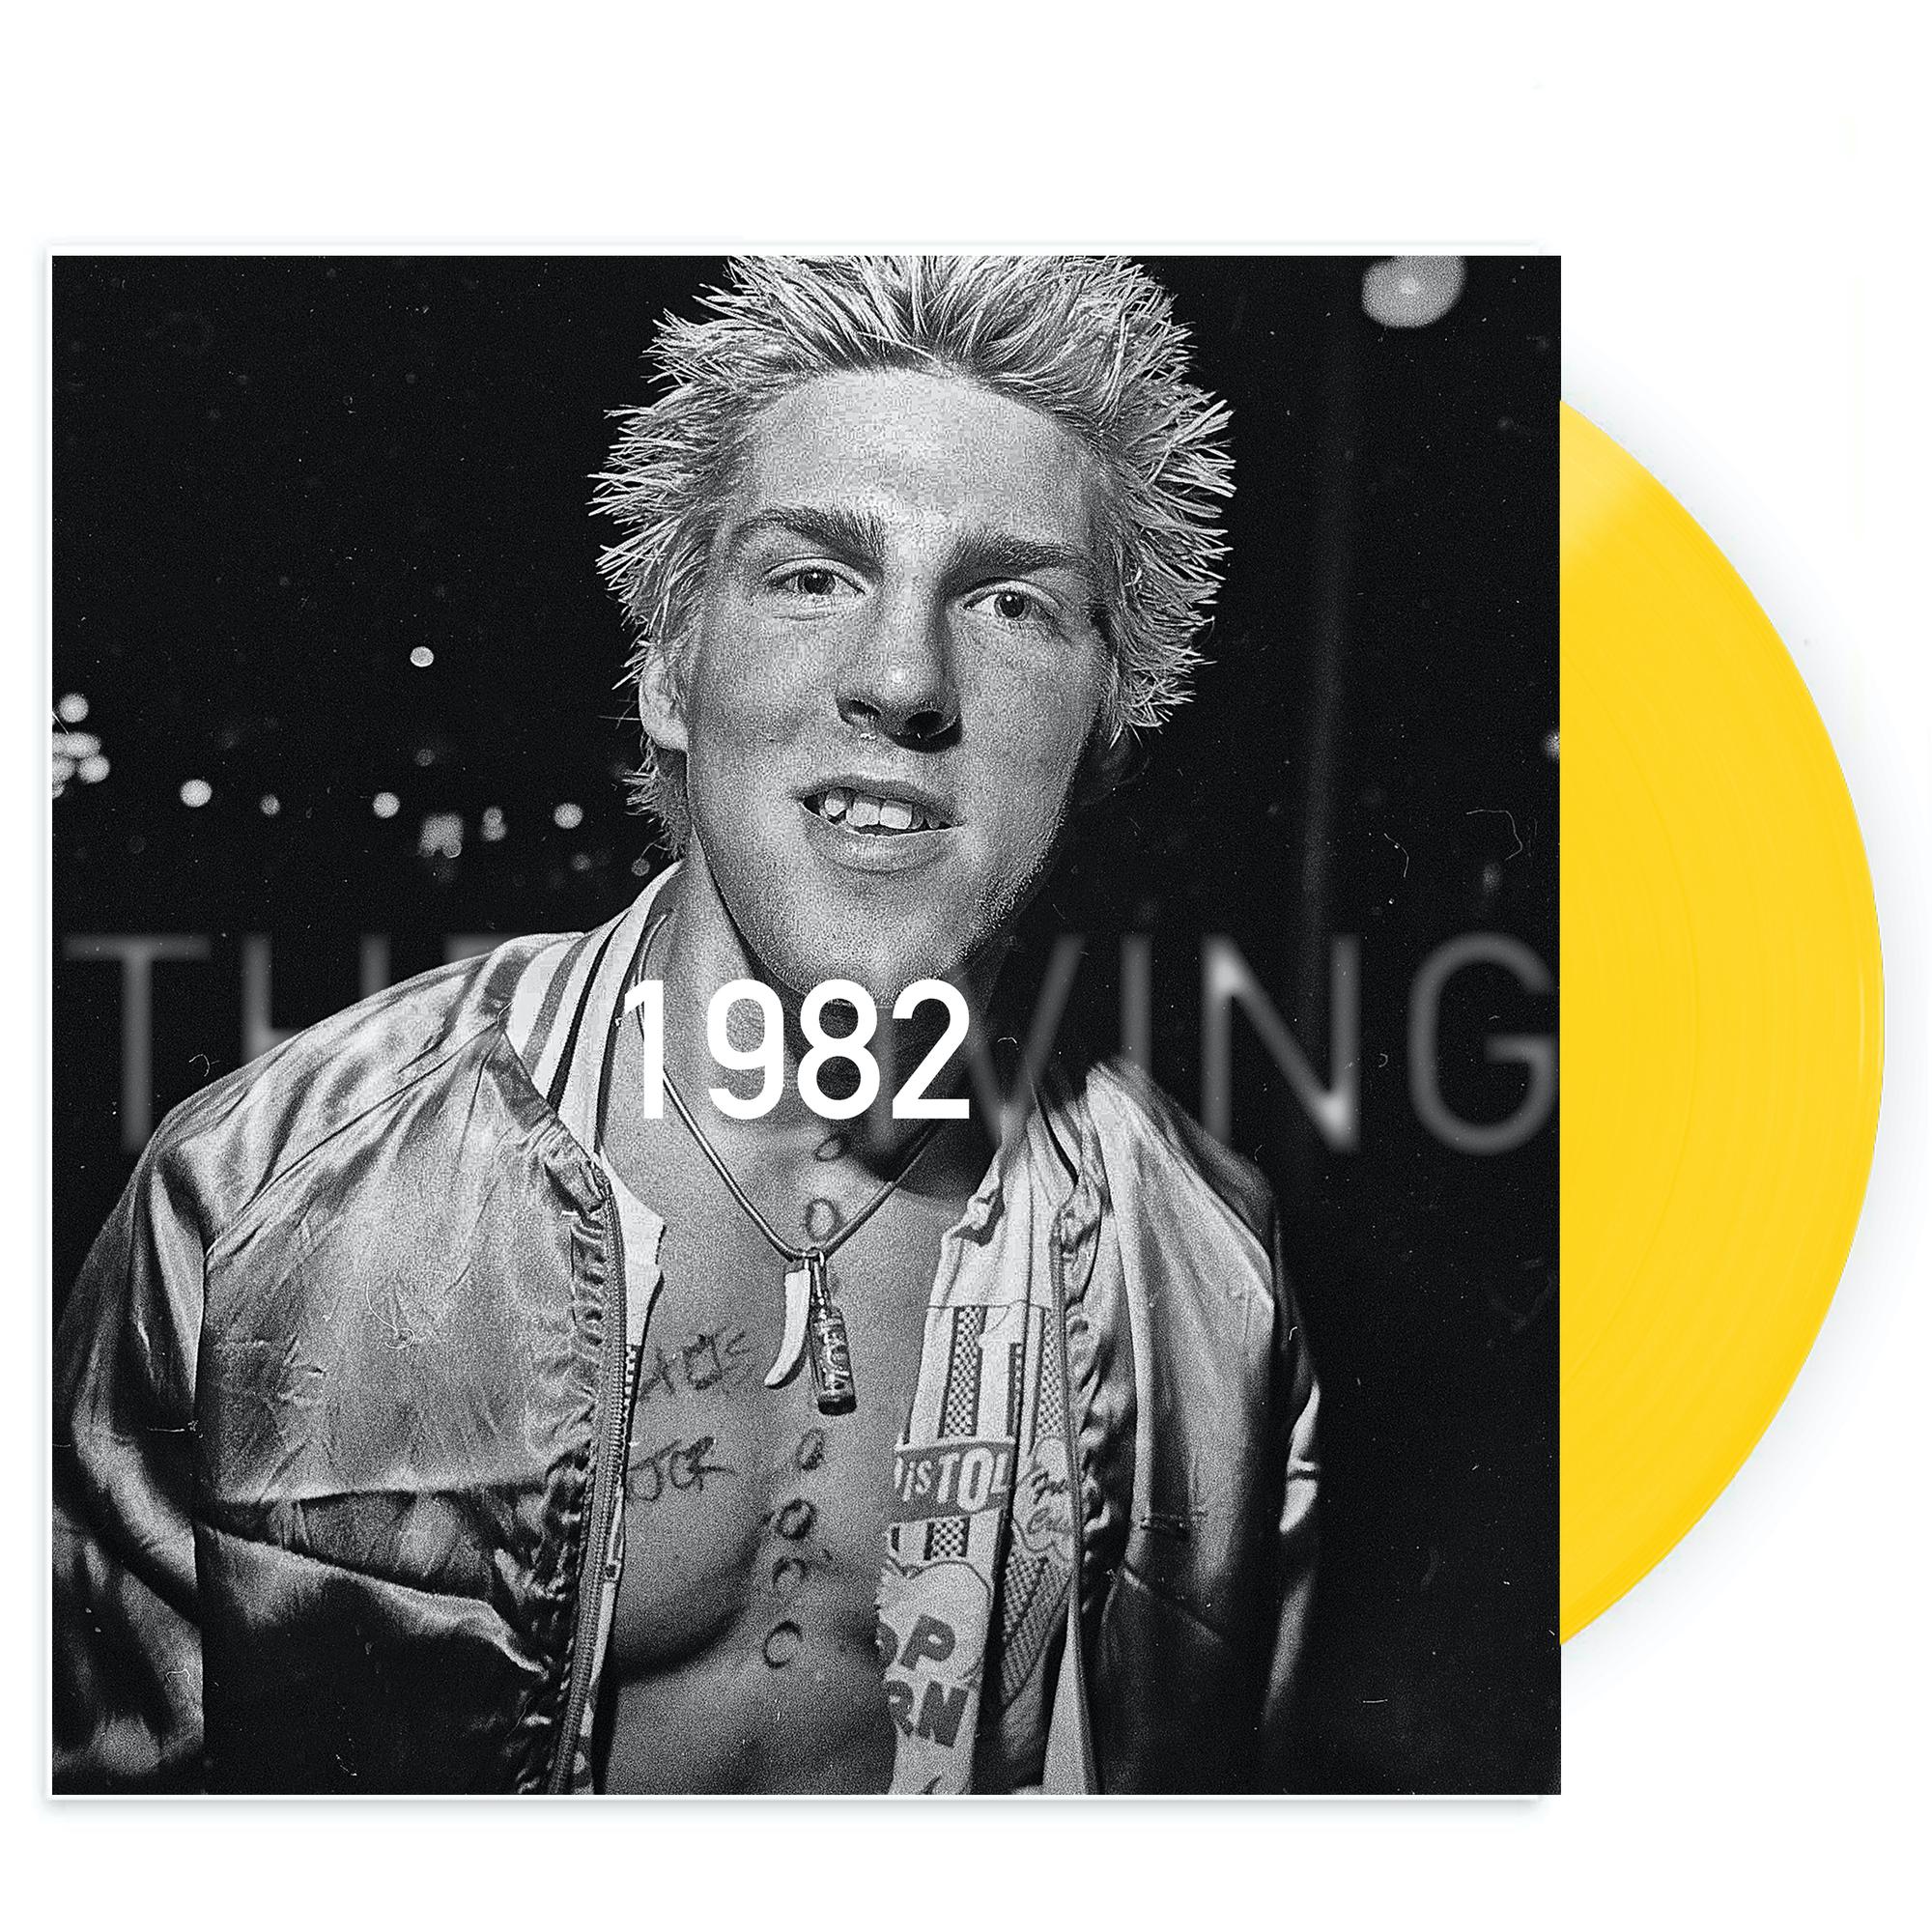 Buy The Living - 1982 (Indie Exclusive Limited Edition, Canary Yellow Vinyl)